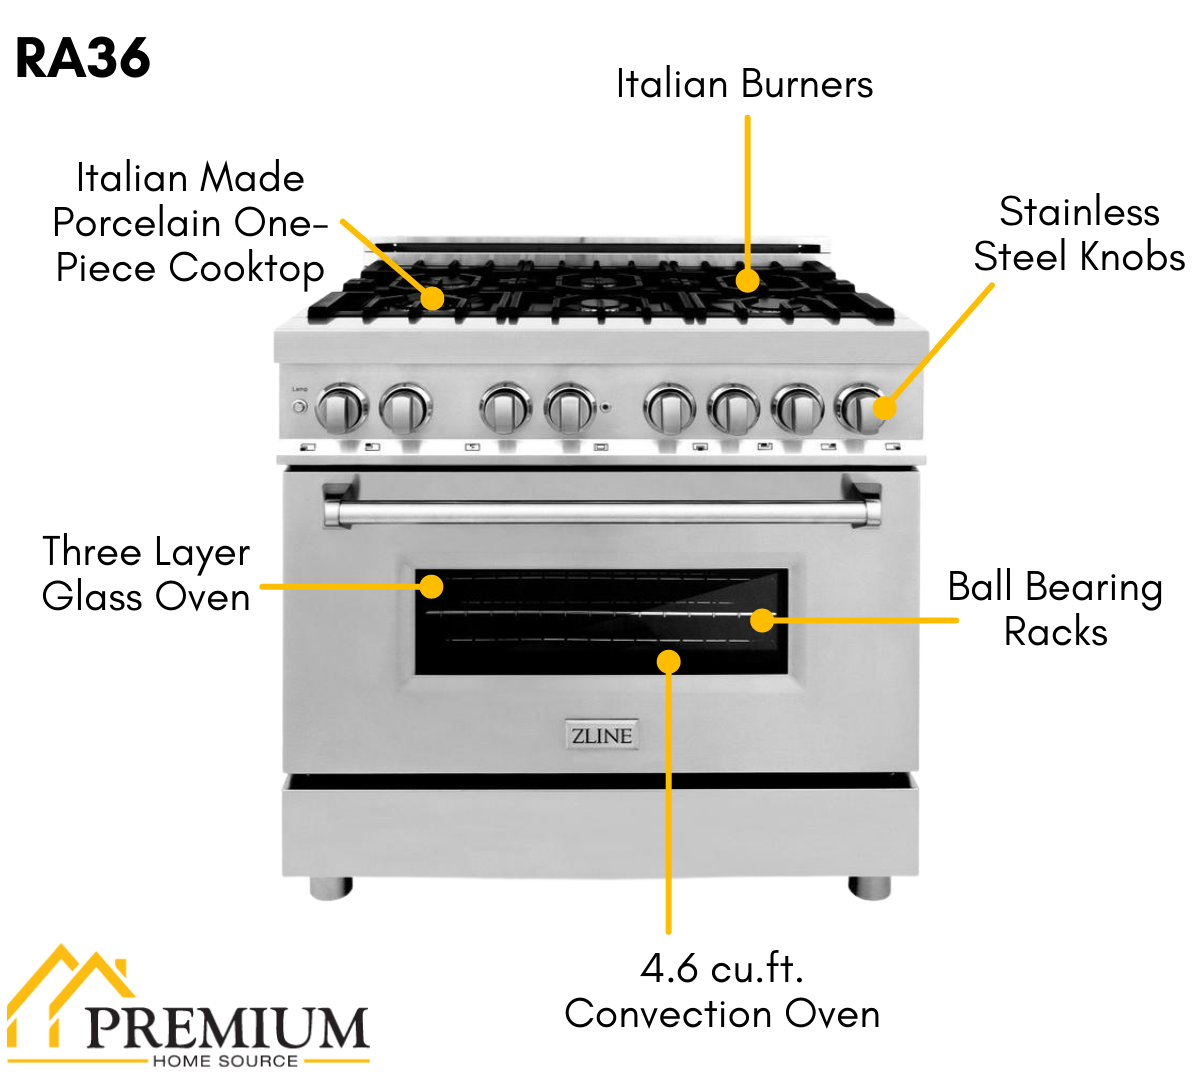 ZLINE 36" Kitchen Package with Stainless Steel Dual Fuel Range, Range Hood, Microwave Drawer and Tall Tub Dishwasher